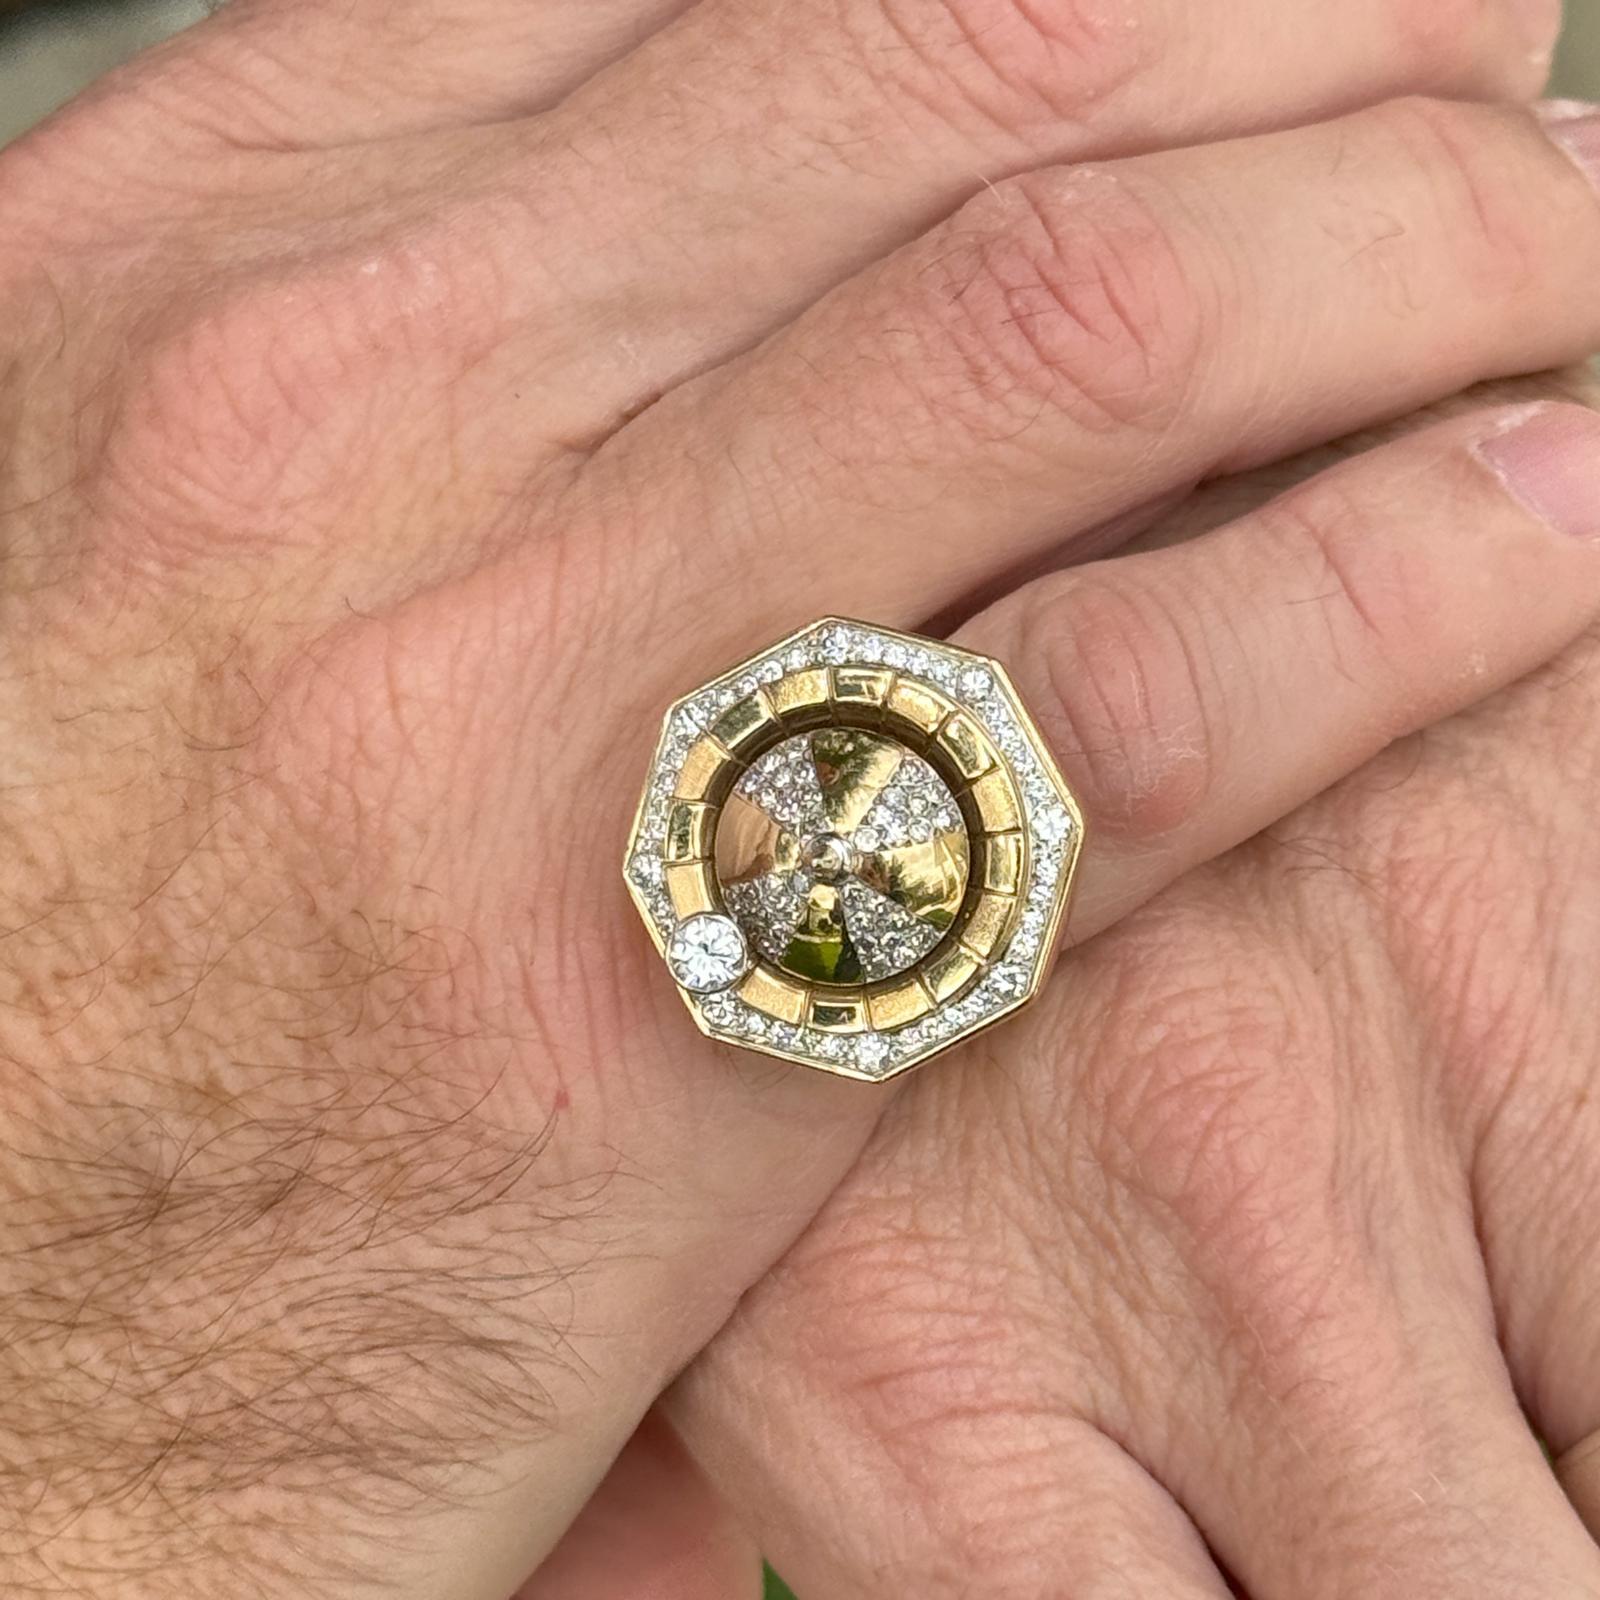 Gents diamond roulette wheel spinner ring handcrafted in 18 karat yellow gold. The ring features 51 round brilliant cut diamonds weighing approximately .79 carat total weight and graded G-H color and VS2-SI1 clarity. The ring measures 25 x 25mm on